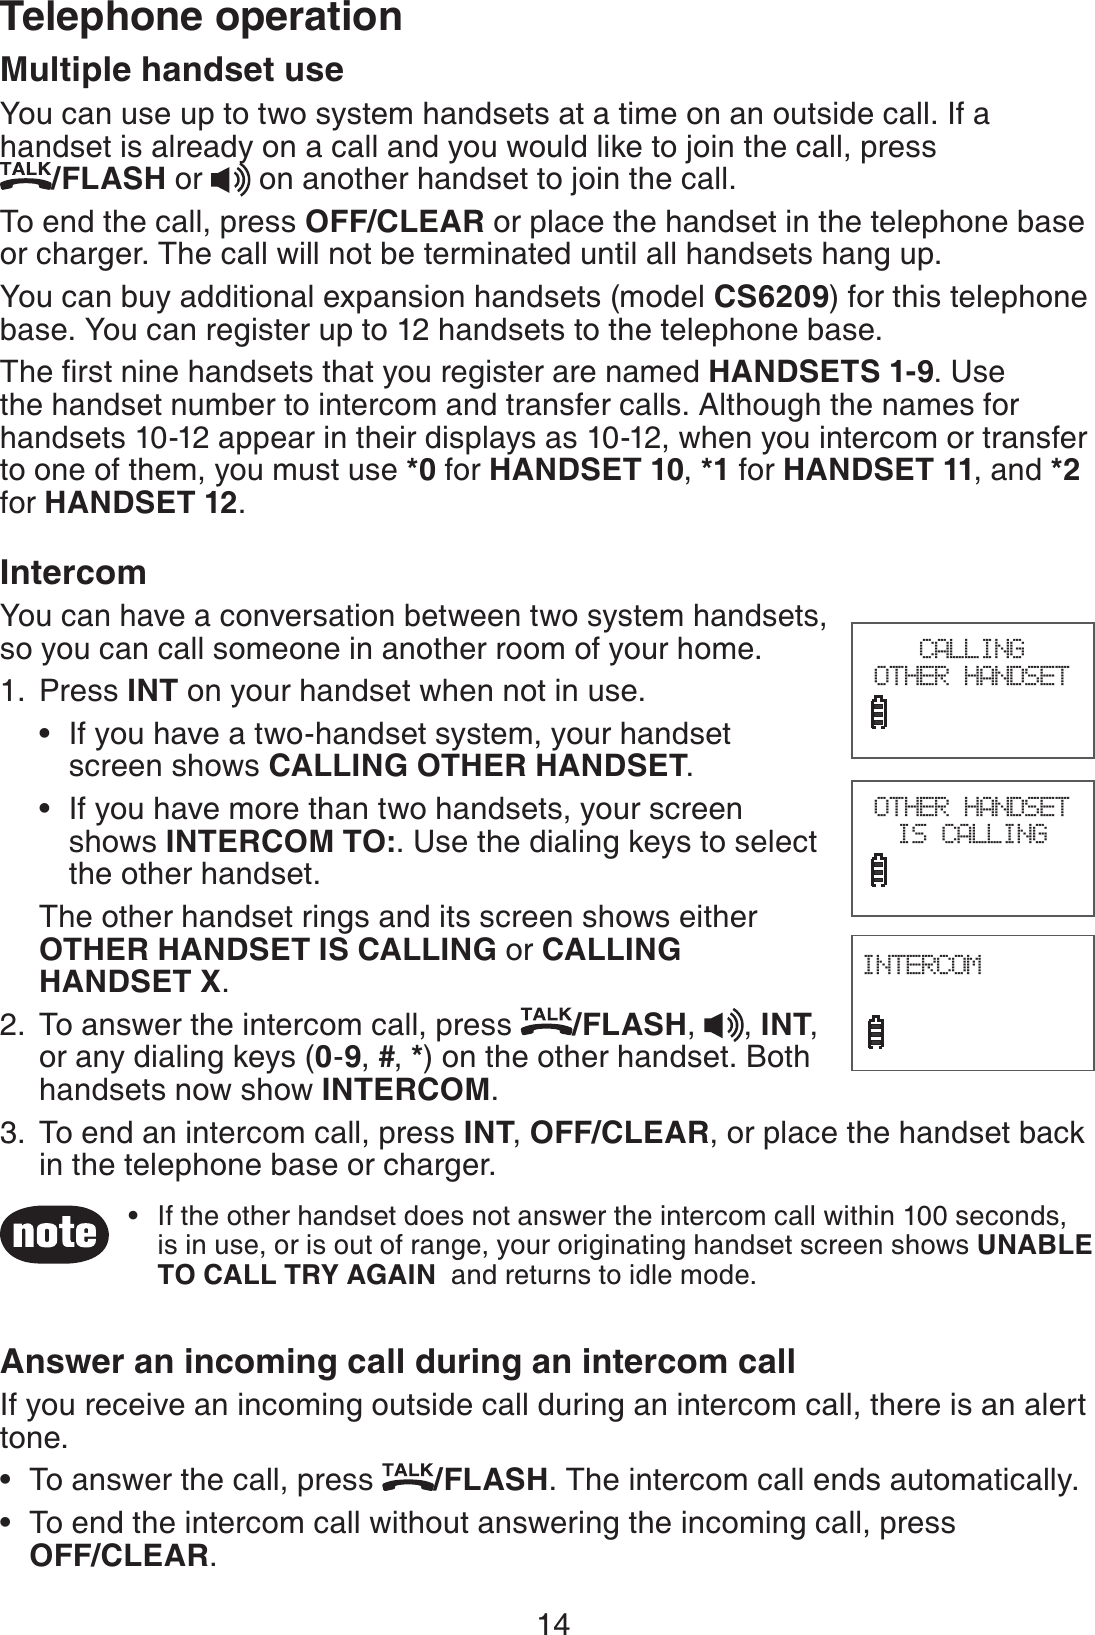 14Telephone operationMultiple handset useYou can use up to two system handsets at a time on an outside call. If a handset is already on a call and you would like to join the call, press    /FLASH or   on another handset to join the call.To end the call, press OFF/CLEAR or place the handset in the telephone base or charger. The call will not be terminated until all handsets hang up.You can buy additional expansion handsets (model CS6209) for this telephone base. You can register up to 12 handsets to the telephone base.The first nine handsets that you register are named HANDSETS 1-9. Use the handset number to intercom and transfer calls. Although the names for handsets 10-12 appear in their displays as 10-12, when you intercom or transfer to one of them, you must use *0 for HANDSET 10, *1 for HANDSET 11, and *2 for HANDSET 12.IntercomYou can have a conversation between two system handsets, so you can call someone in another room of your home.Press INT on your handset when not in use.If you have a two-handset system, your handset    screen shows CALLING OTHER HANDSET.If you have more than two handsets, your screen   shows INTERCOM TO:. Use the dialing keys to select      the other handset.The other handset rings and its screen shows either OTHER HANDSET IS CALLING or CALLING HANDSET X.To answer the intercom call, press  /FLASH,  , INT, or any dialing keys (0-9, #, *) on the other handset. Both handsets now show INTERCOM.To end an intercom call, press INT, OFF/CLEAR, or place the handset back in the telephone base or charger.Answer an incoming call during an intercom callIf you receive an incoming outside call during an intercom call, there is an alert tone.To answer the call, press  /FLASH. The intercom call ends automatically.To end the intercom call without answering the incoming call, press    OFF/CLEAR.1.••2.3.••If the other handset does not answer the intercom call within 100 seconds, is in use, or is out of range, your originating handset screen shows UNABLE TO CALL TRY AGAIN  and returns to idle mode.•OTHER HANDSET IS CALLINGINTERCOM                             CALLING OTHER HANDSET